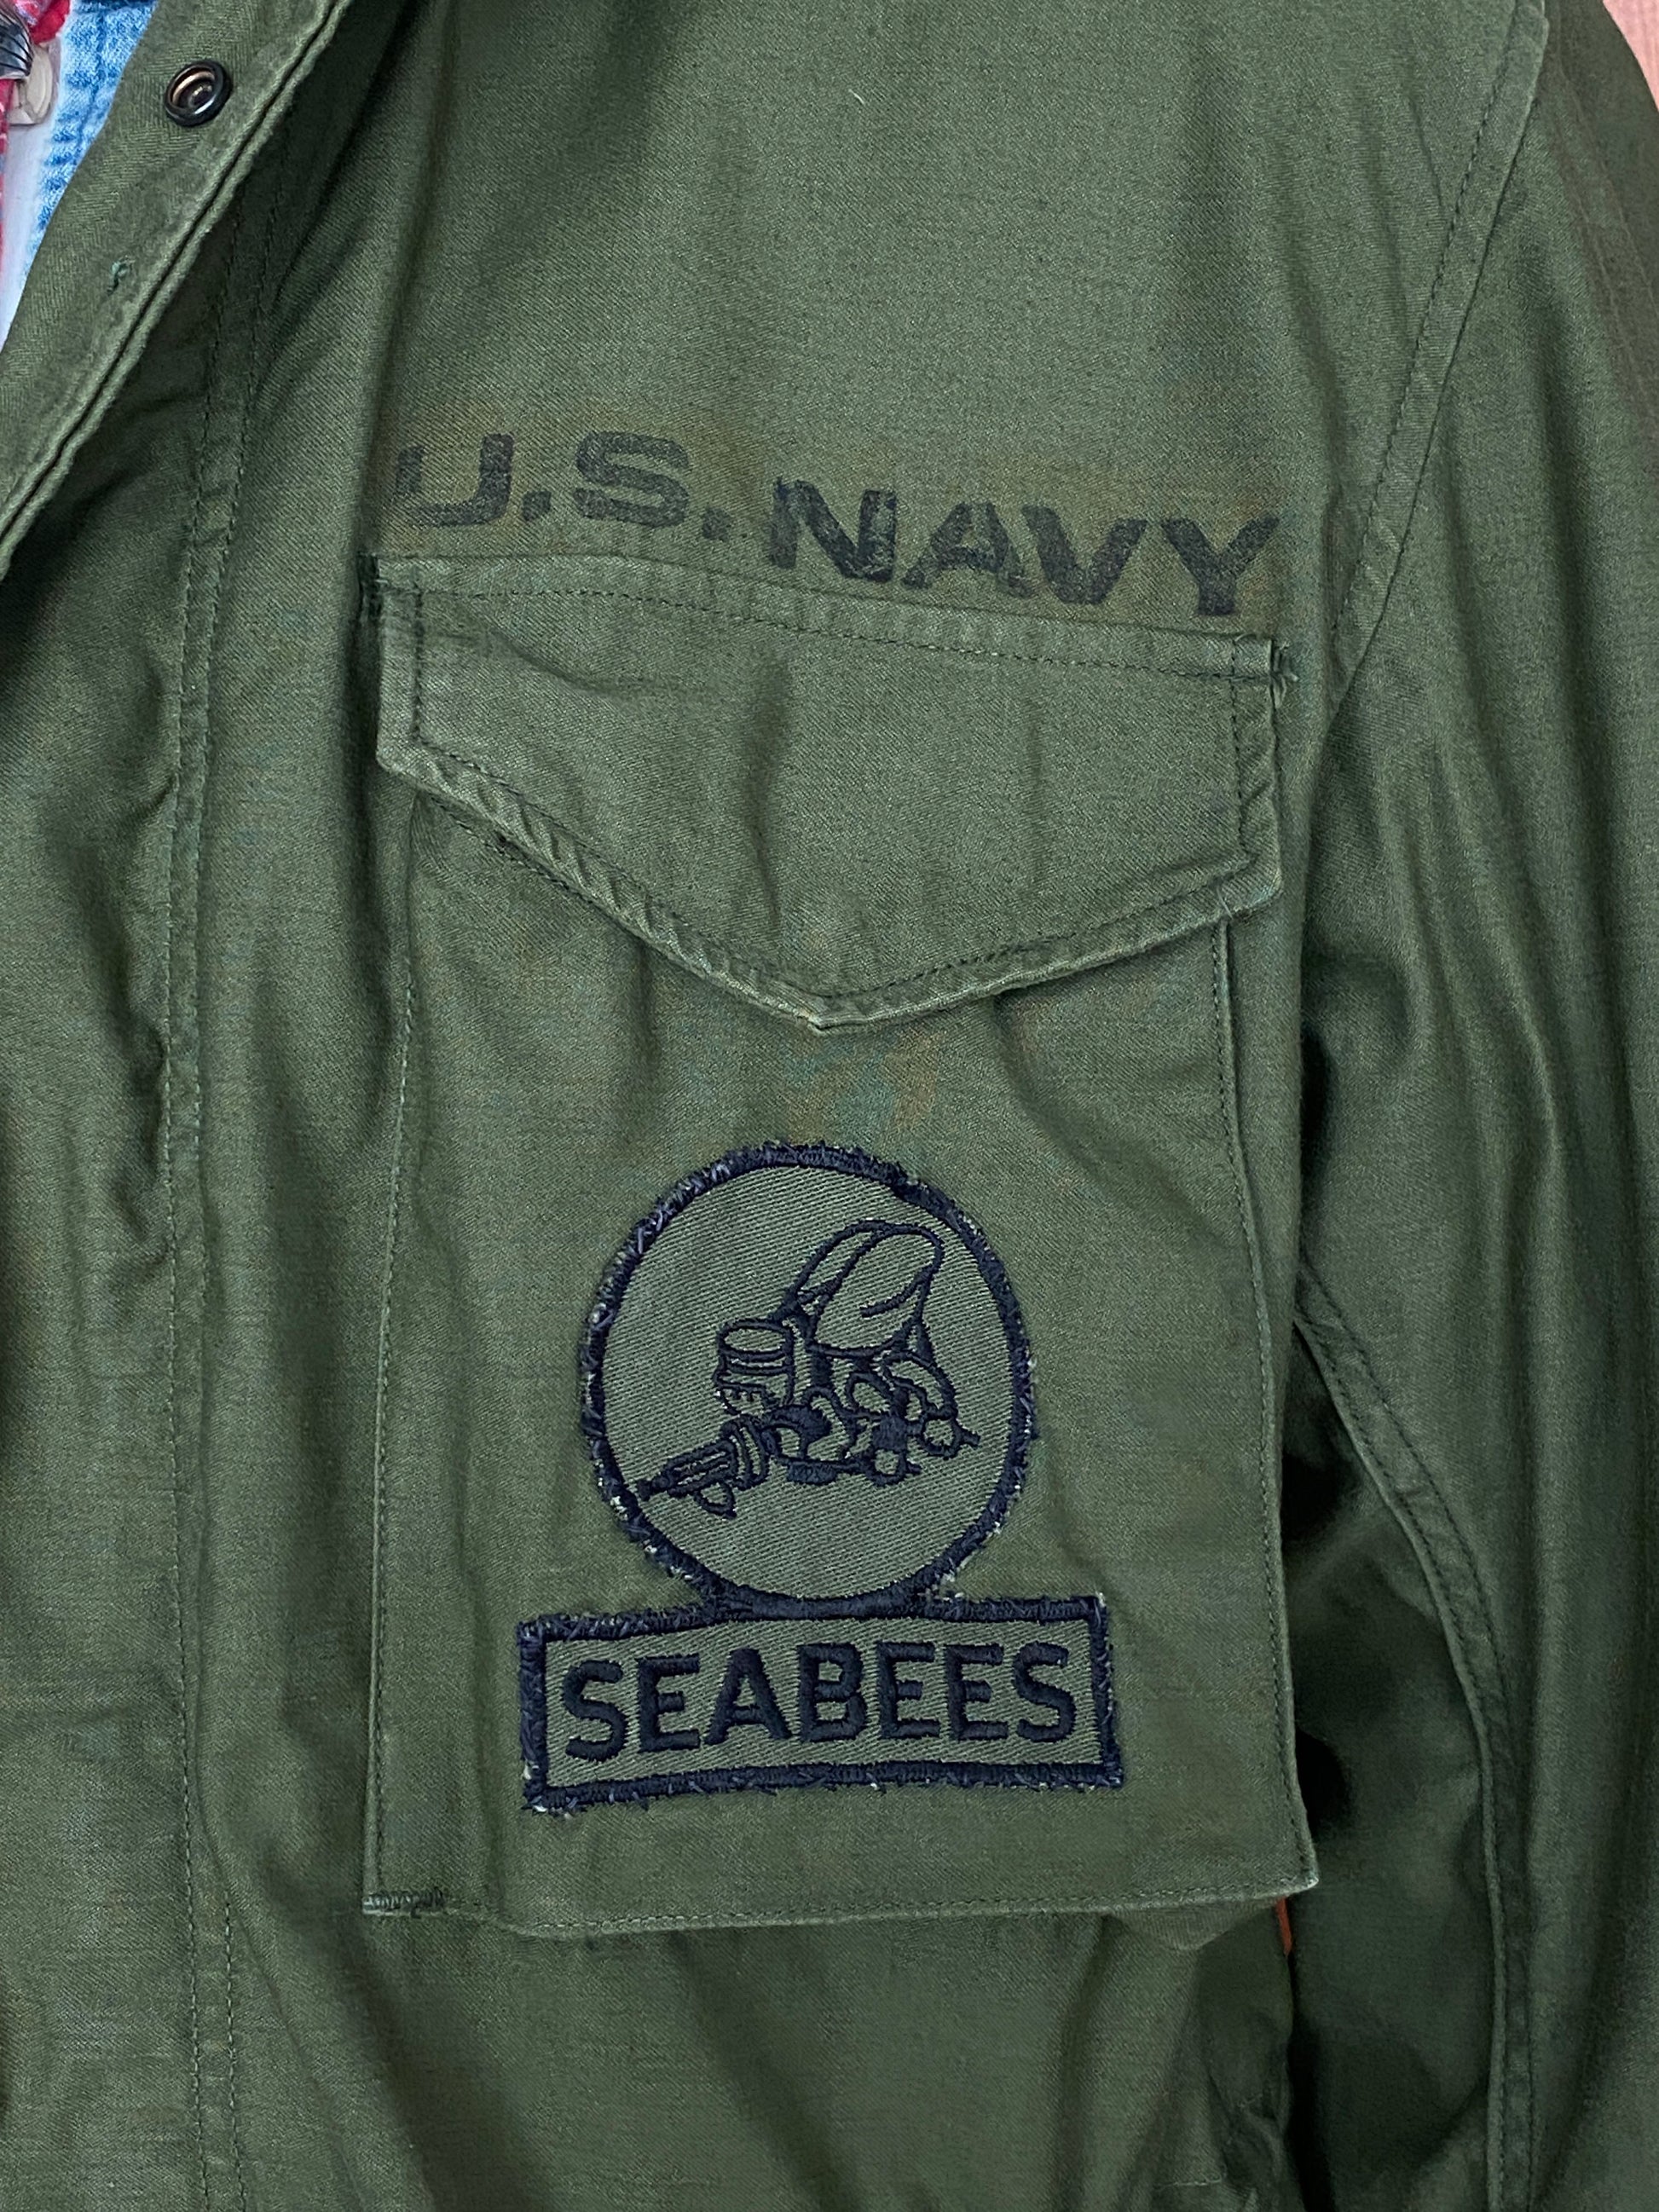 Authentic 1972 Vietnam Era US Navy Seabee Vintage M-65 Field Jacket: Classic Military Apparel with Rich History.